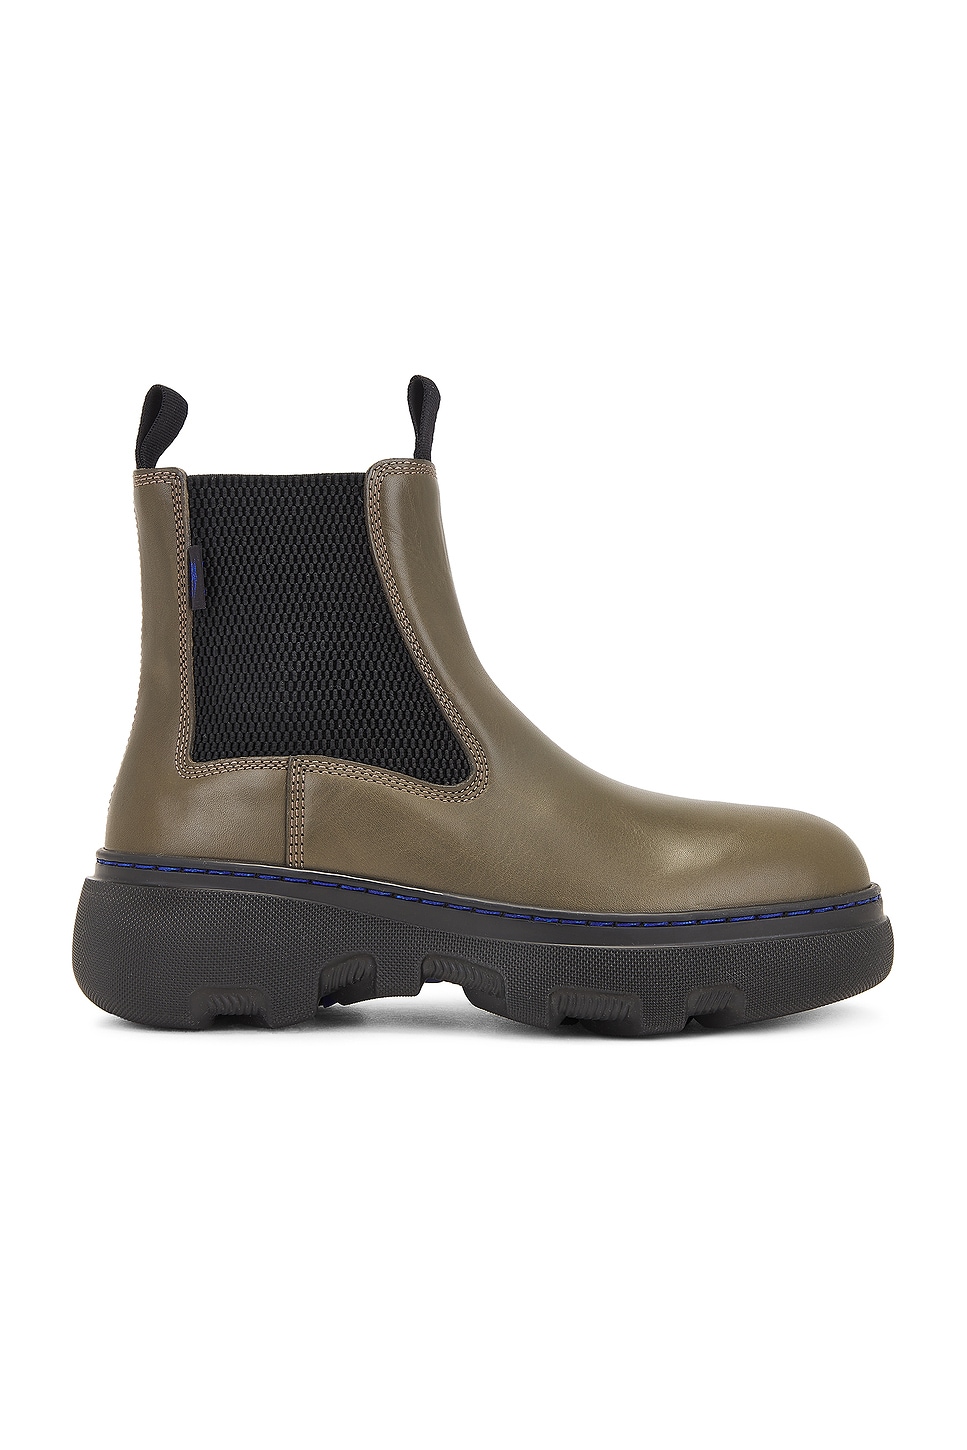 Image 1 of Burberry Chelsea Boot in Loch